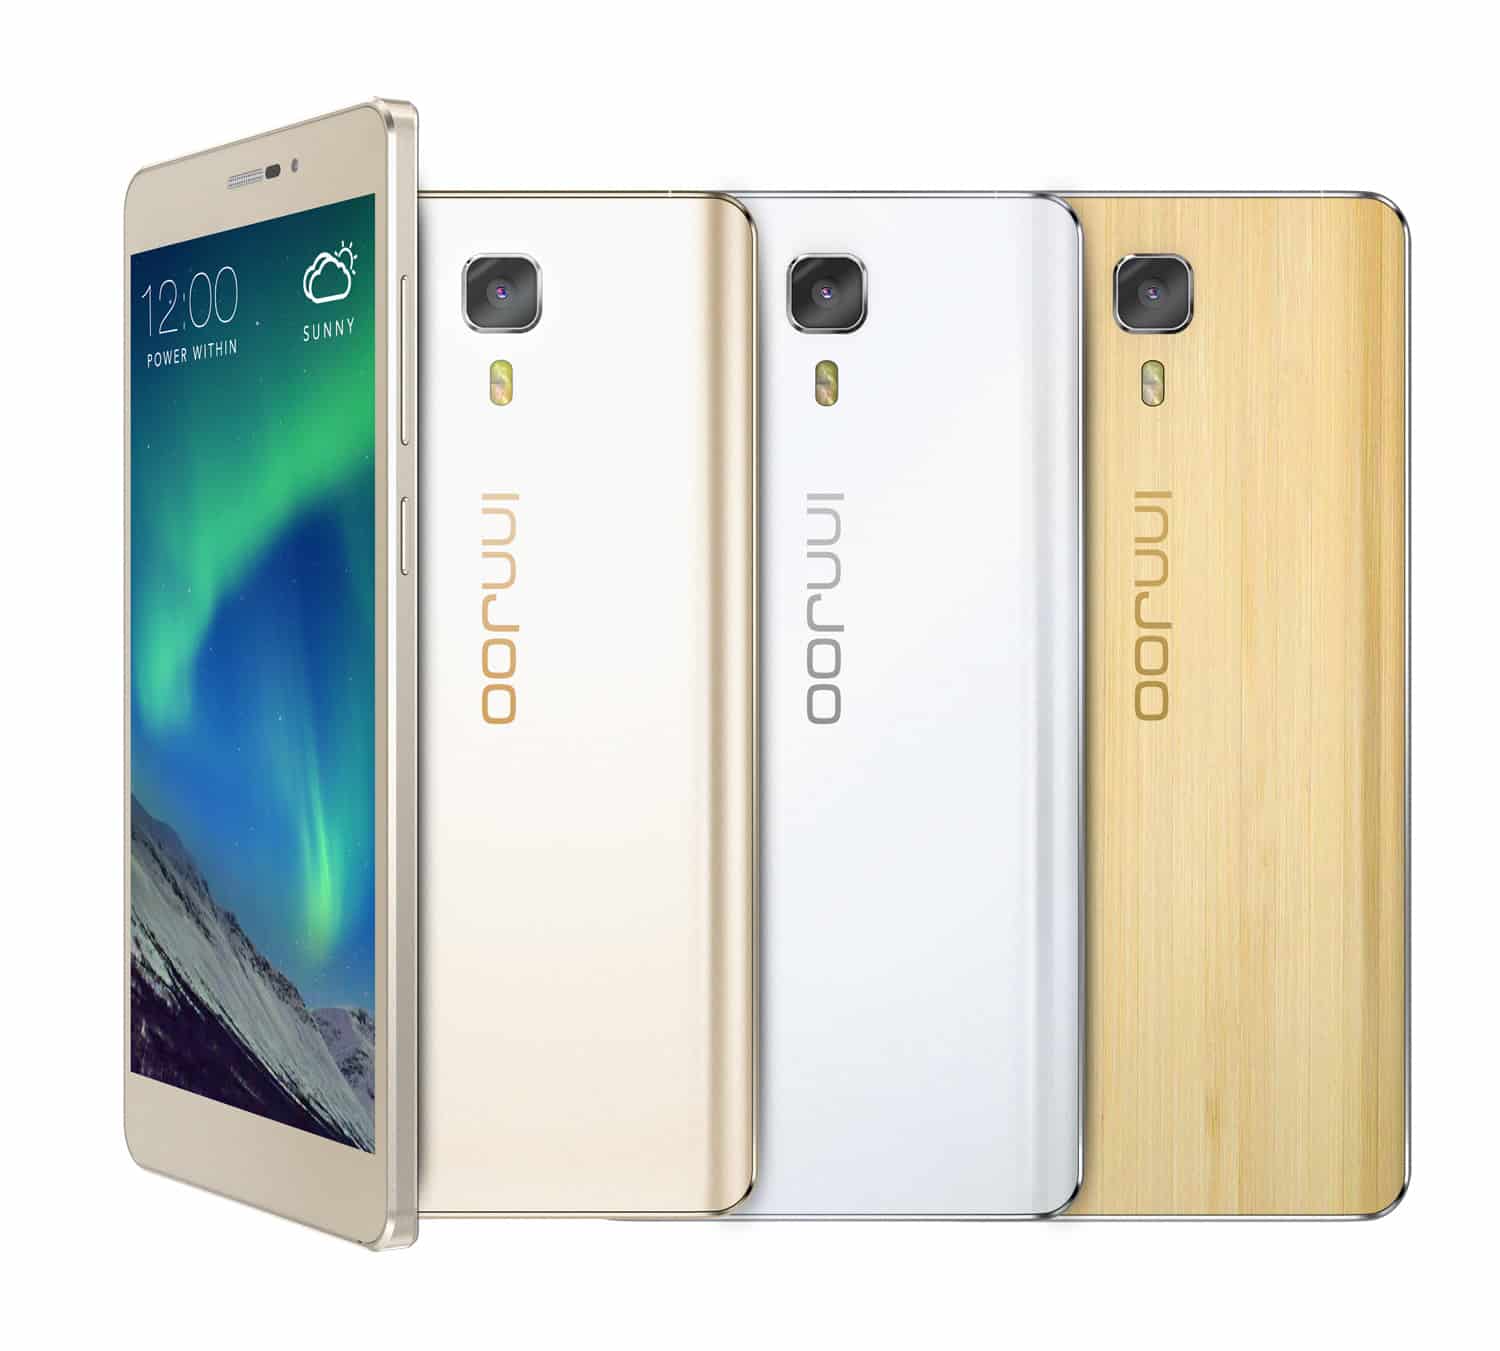 Innjoo Fire Plus Review and Price in Nigeria